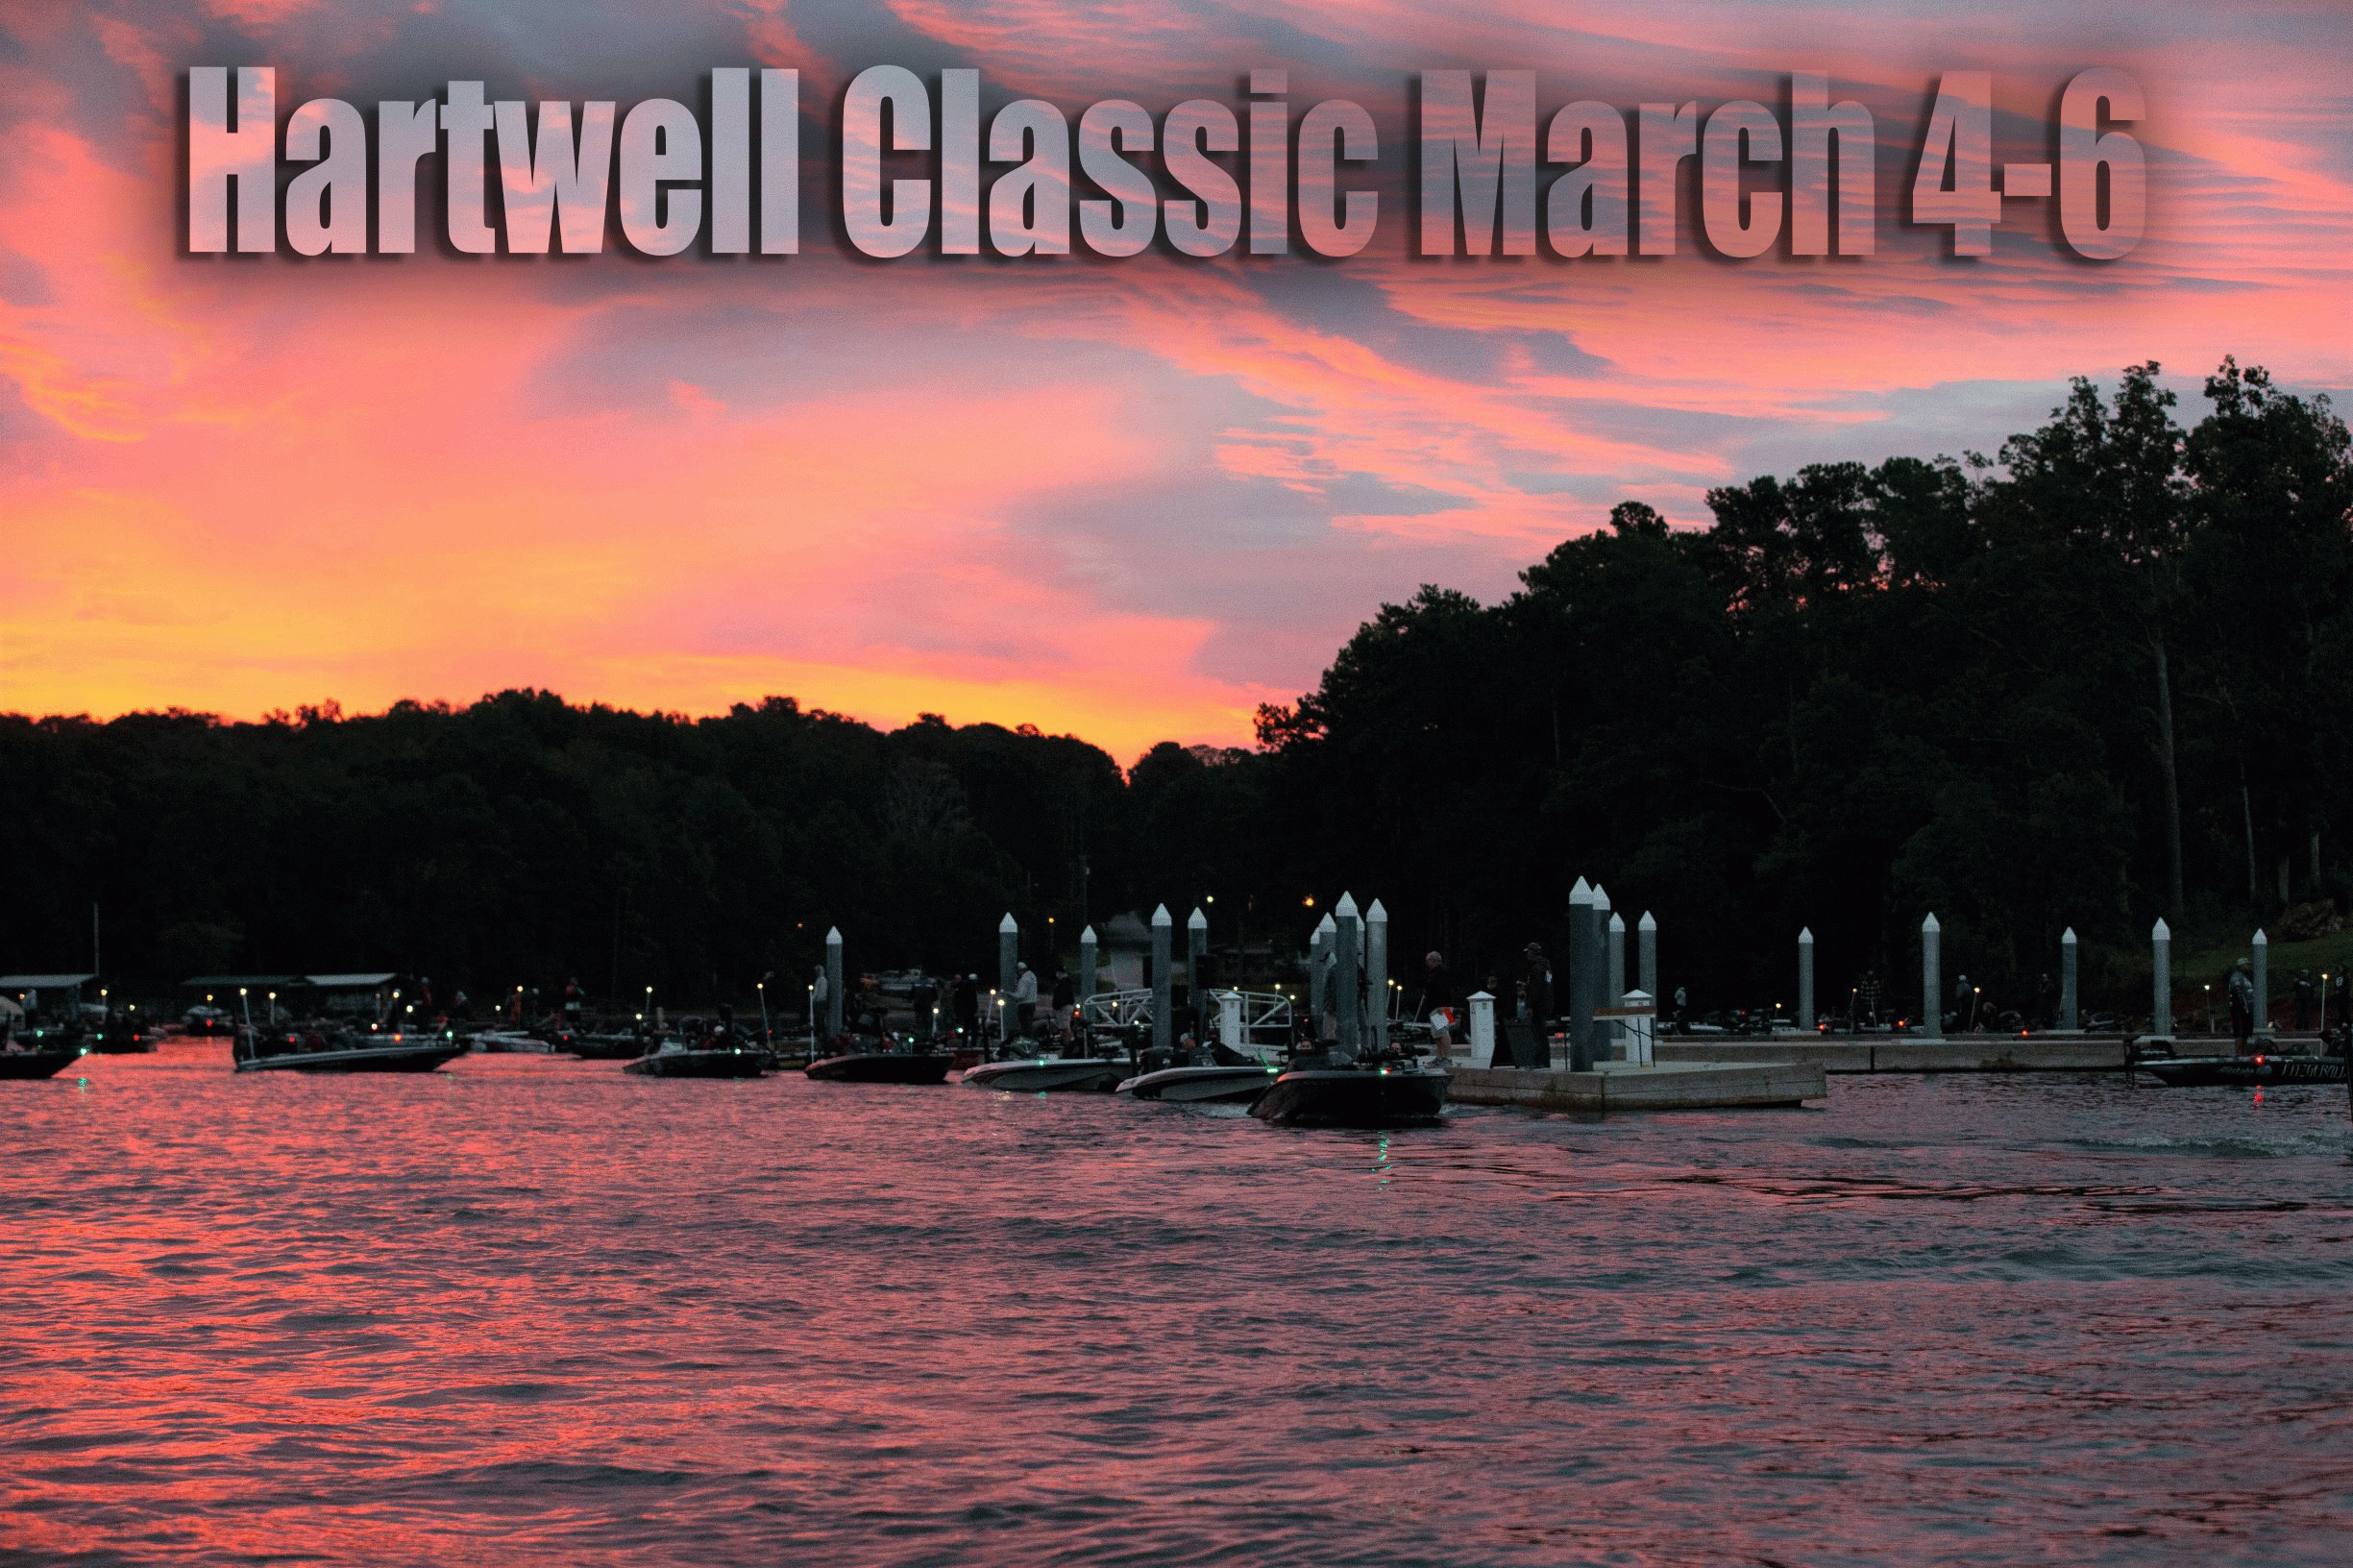 It’s back to the Upcountry of South Carolina for the 2022 Academy Sports + Outdoors Bassmaster Classic presented by Huk. The championship, March 4-6, is visiting Lake Hartwell for the fourth time in its 52 years.